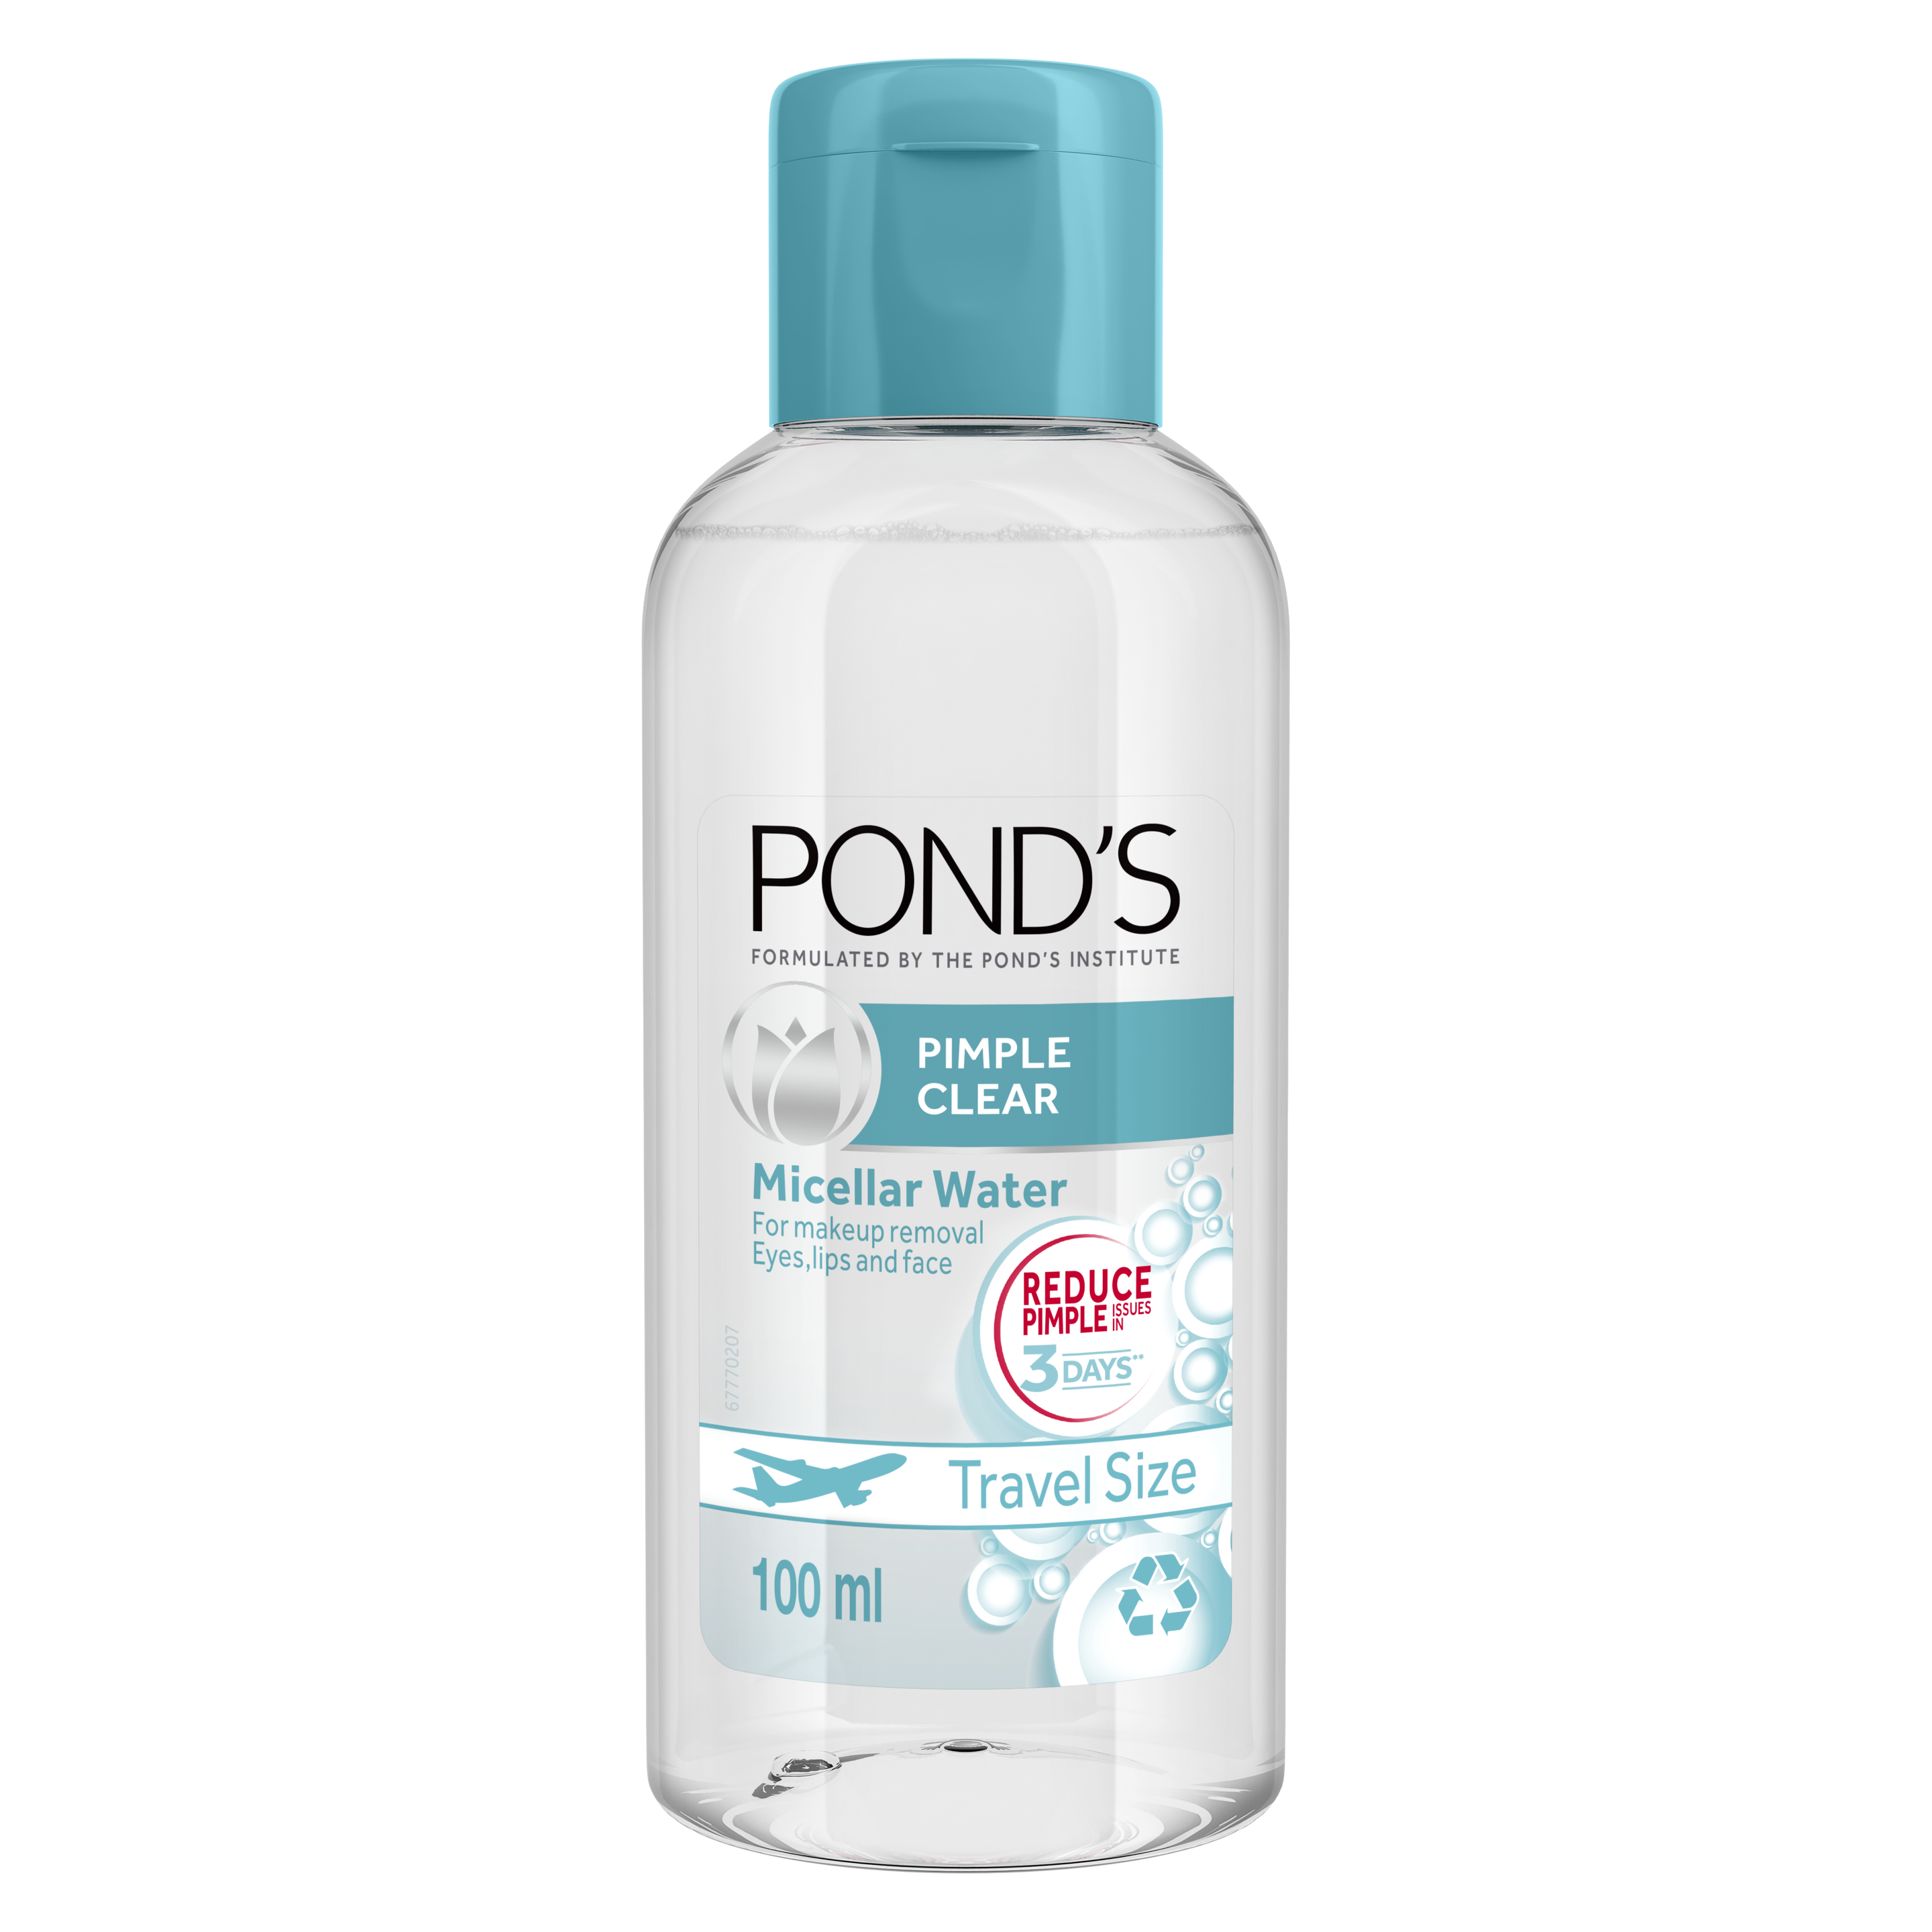 POND'S Pimple Clear Micellar Water Travel Size